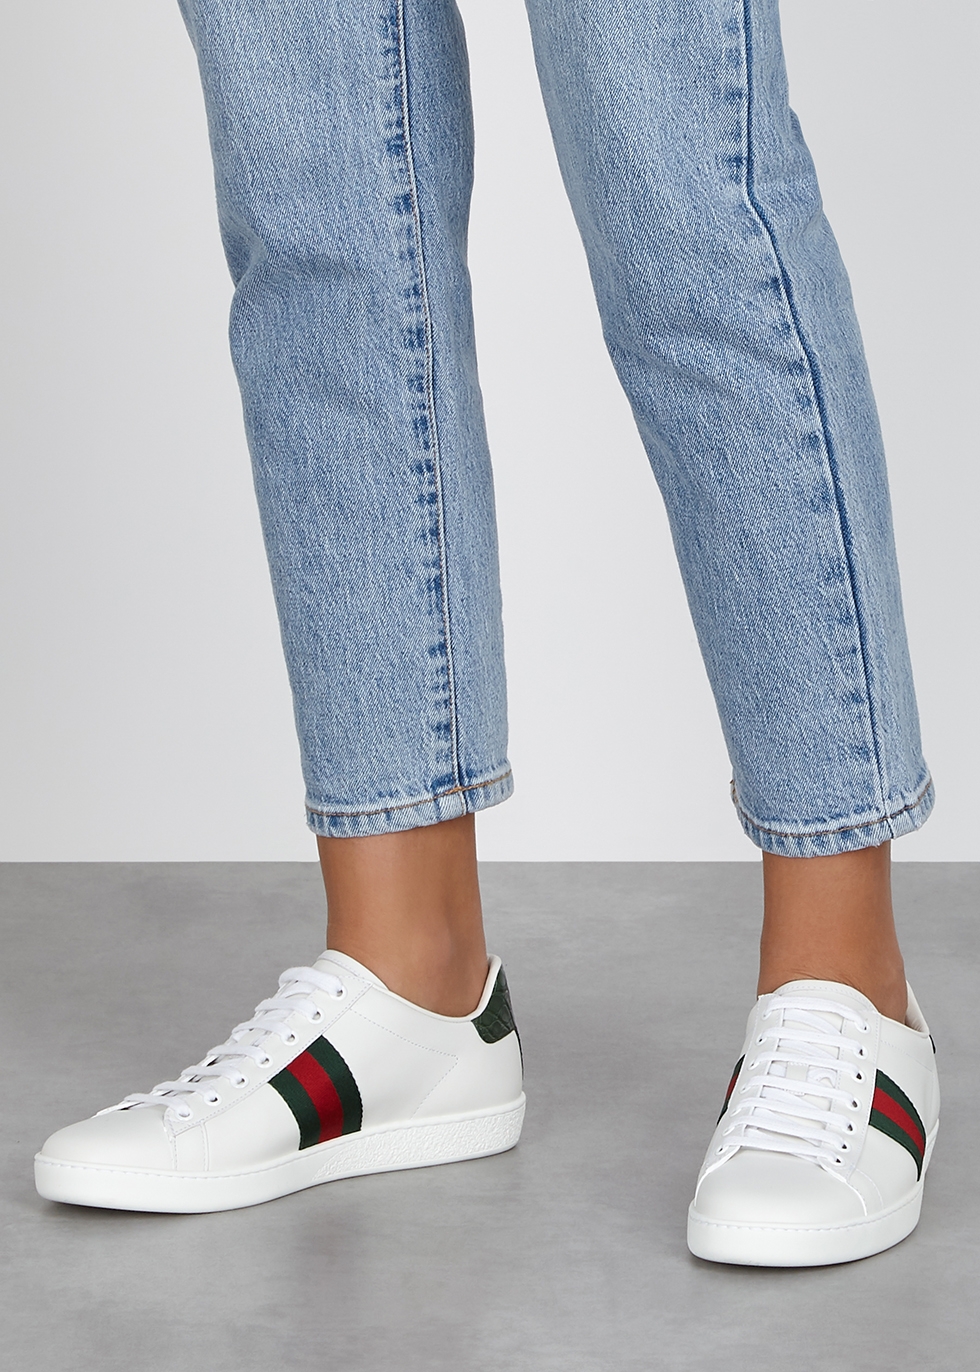 Gucci New Ace white leather sneakers 